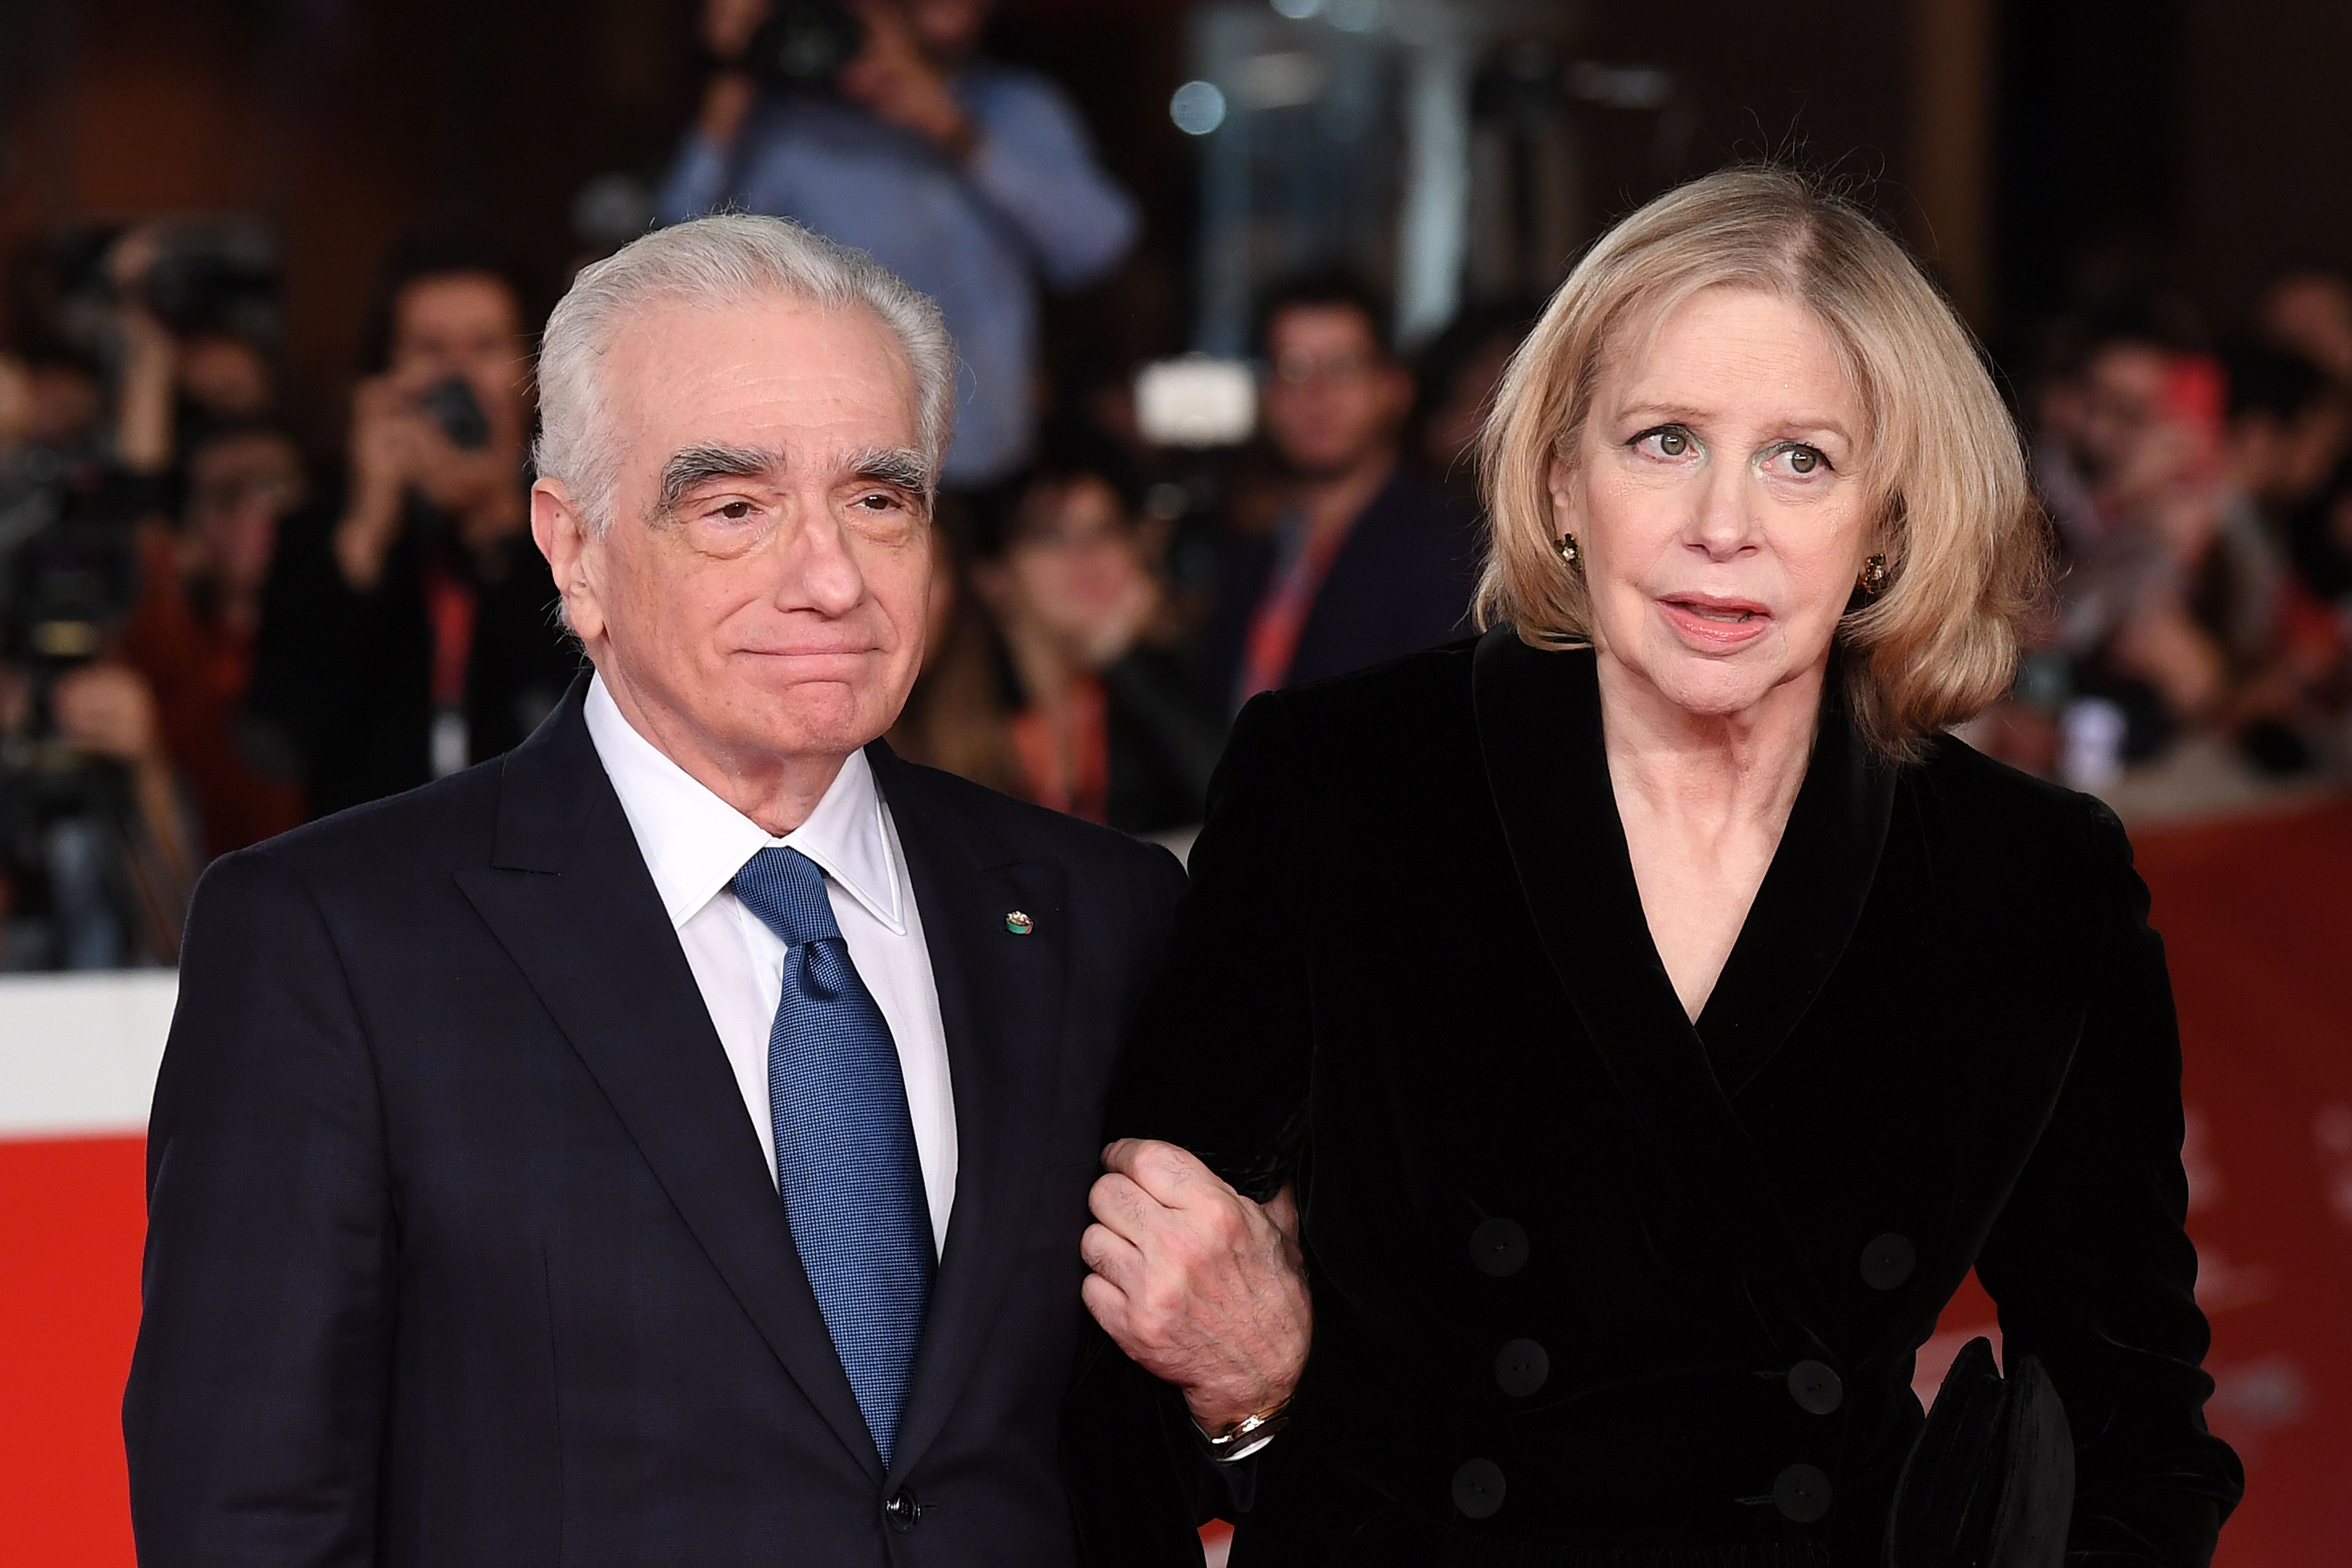 Martin Scorsese and Helen Morris at the 14th Rome Film Festival on October 21, 2019, in Rome, Italy. | Source: Getty Images